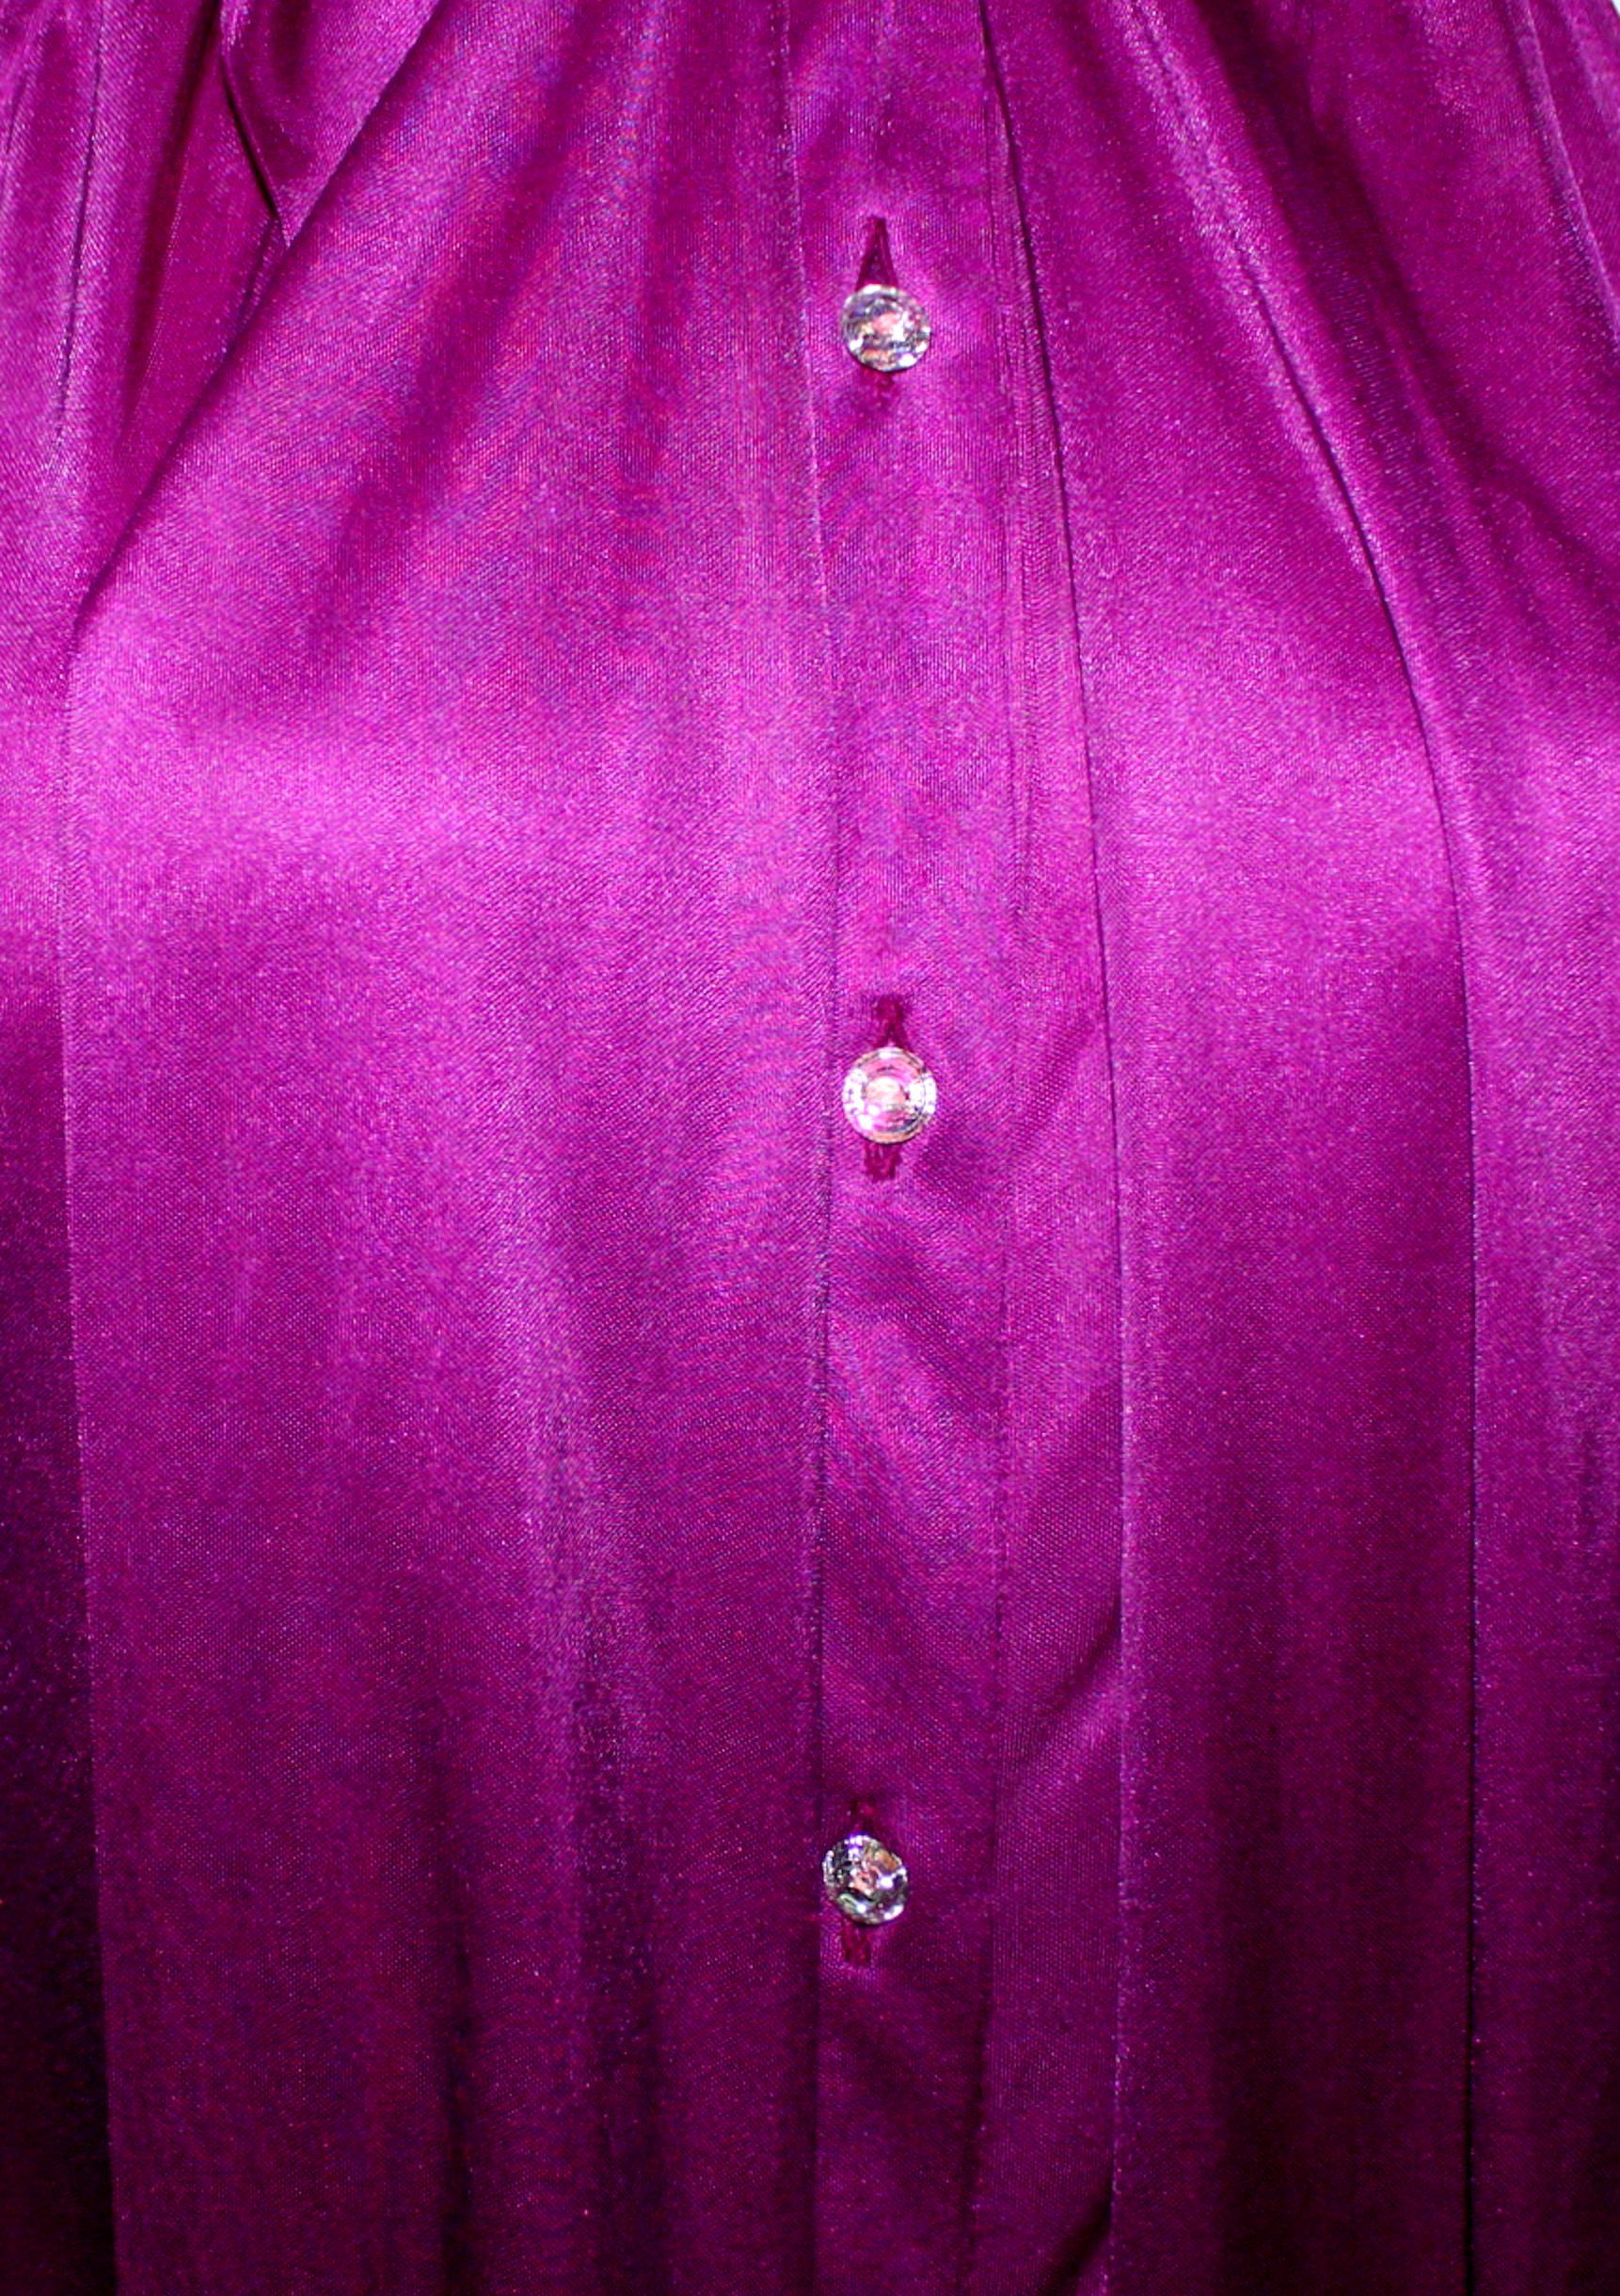 Gianni Versace SS 2000 Jungle Purple Hot Silk Blouse Top Swarovski Buttons 38 In Good Condition For Sale In Switzerland, CH